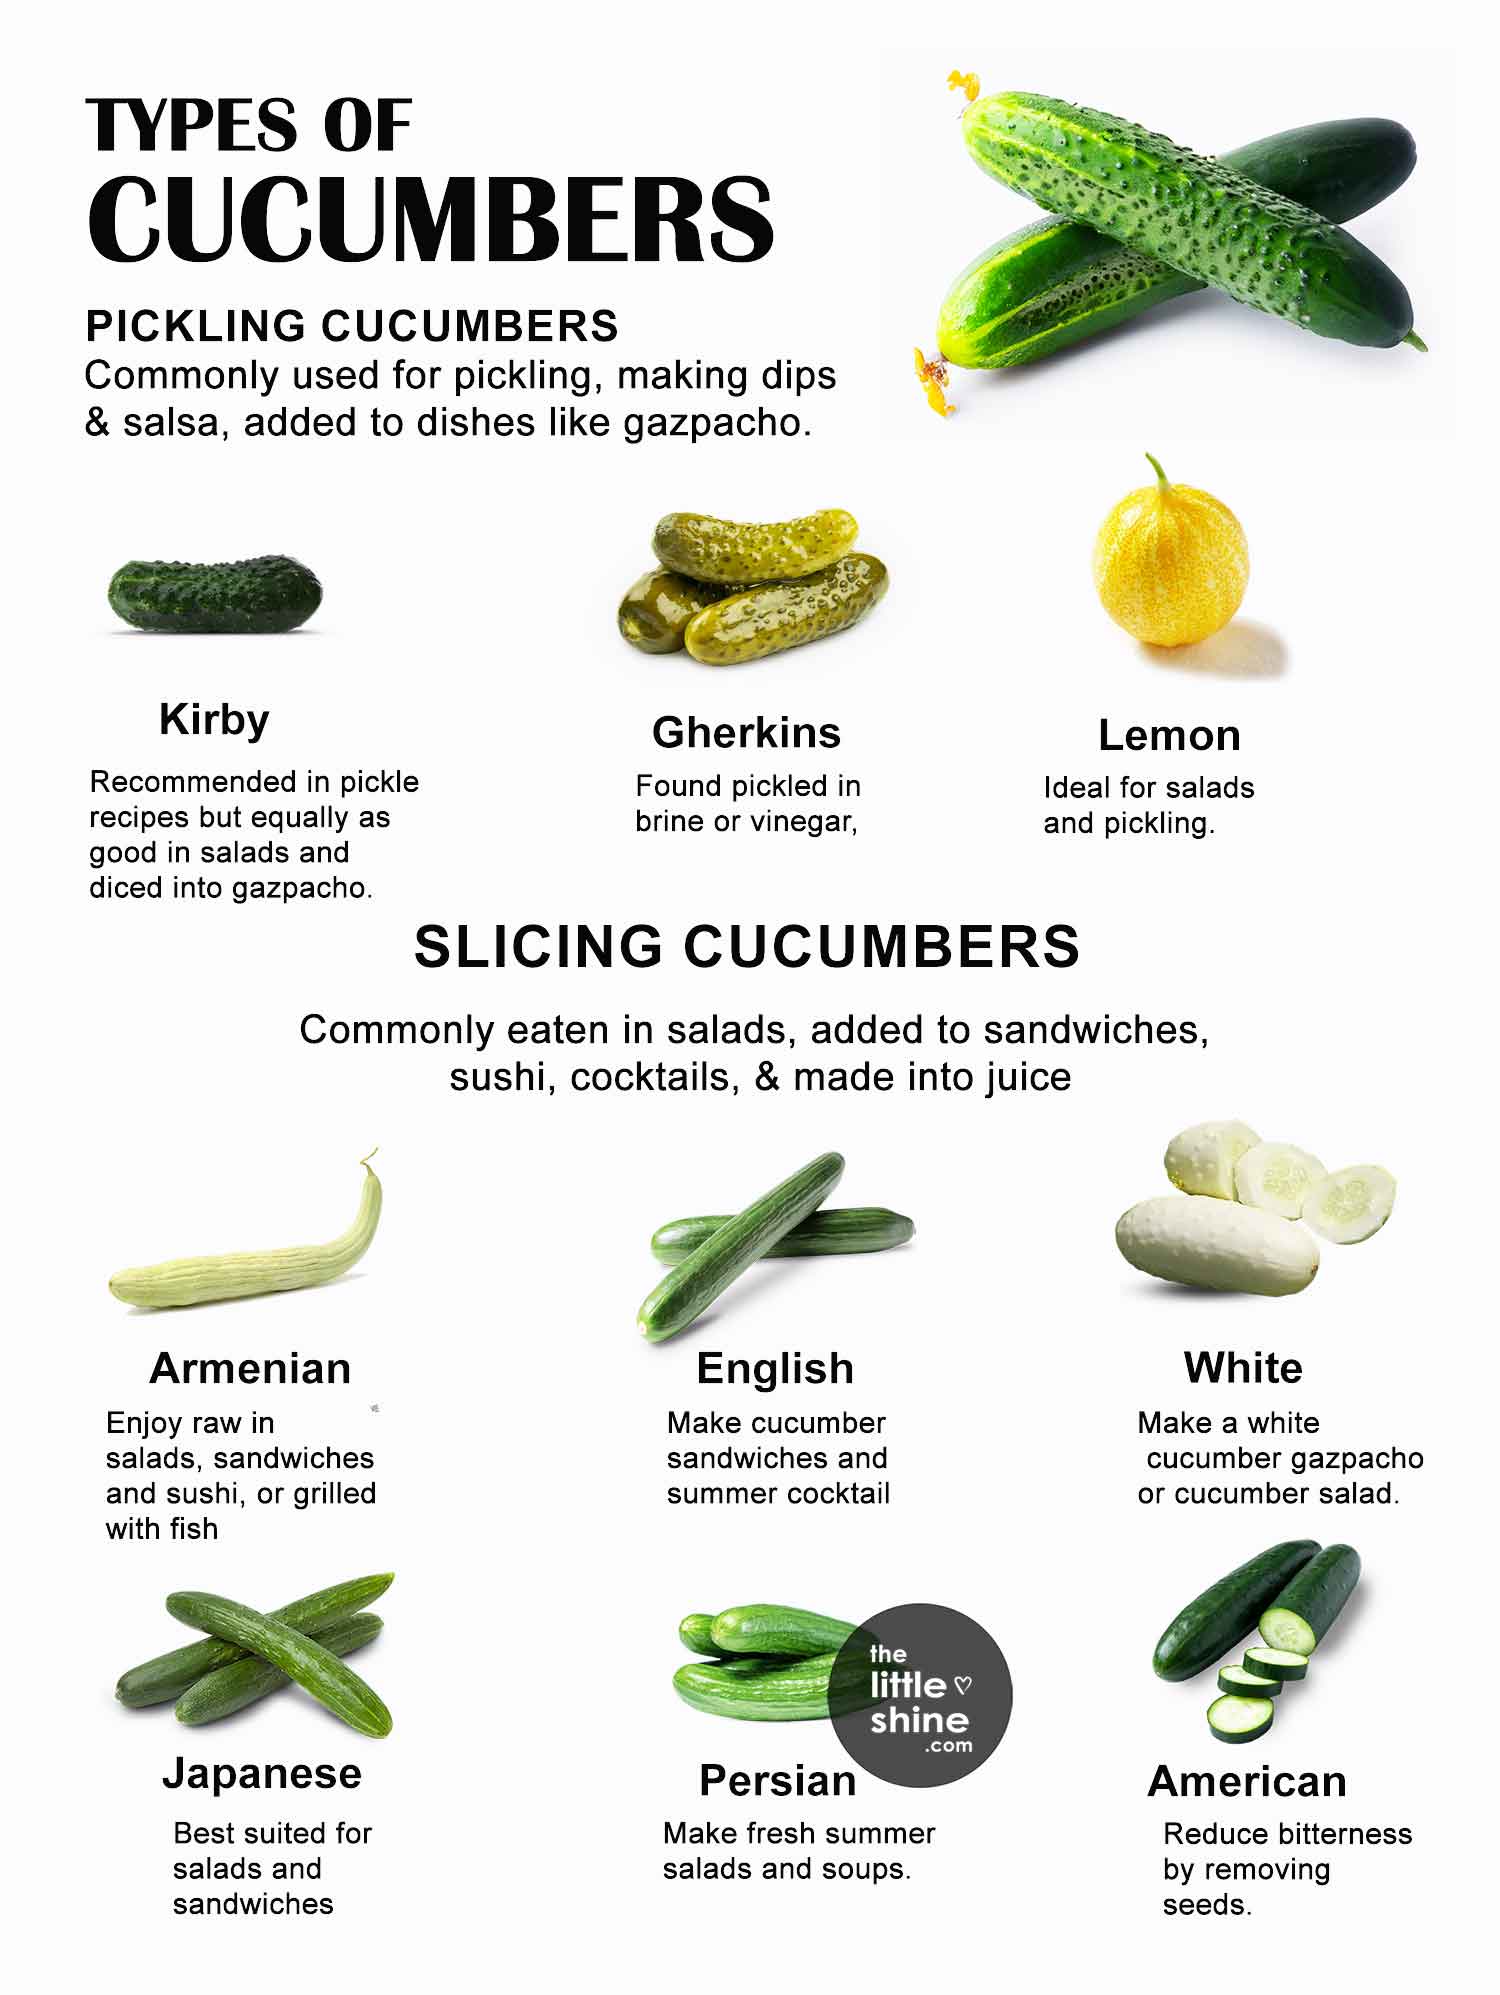 10 Types of Cucumbers and How to Use Them